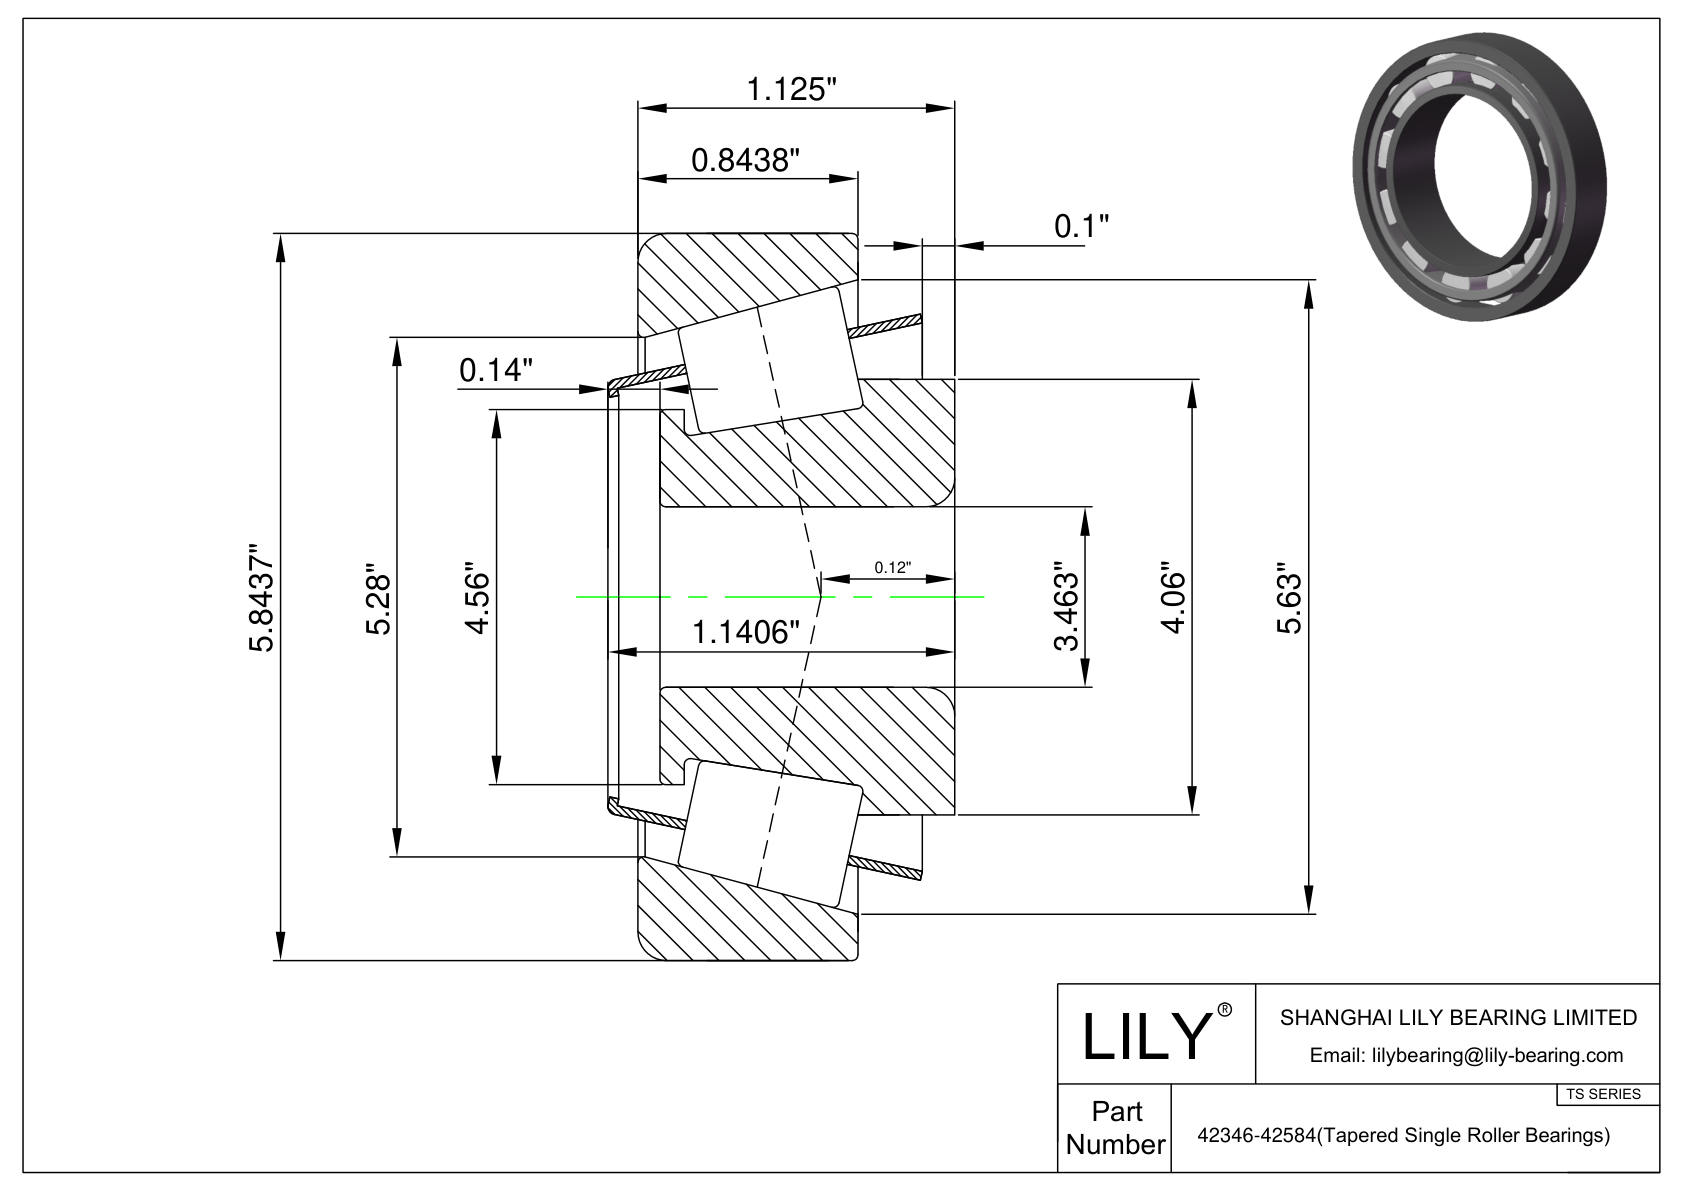 42346-42584 TS (Tapered Single Roller Bearings) (Imperial) cad drawing